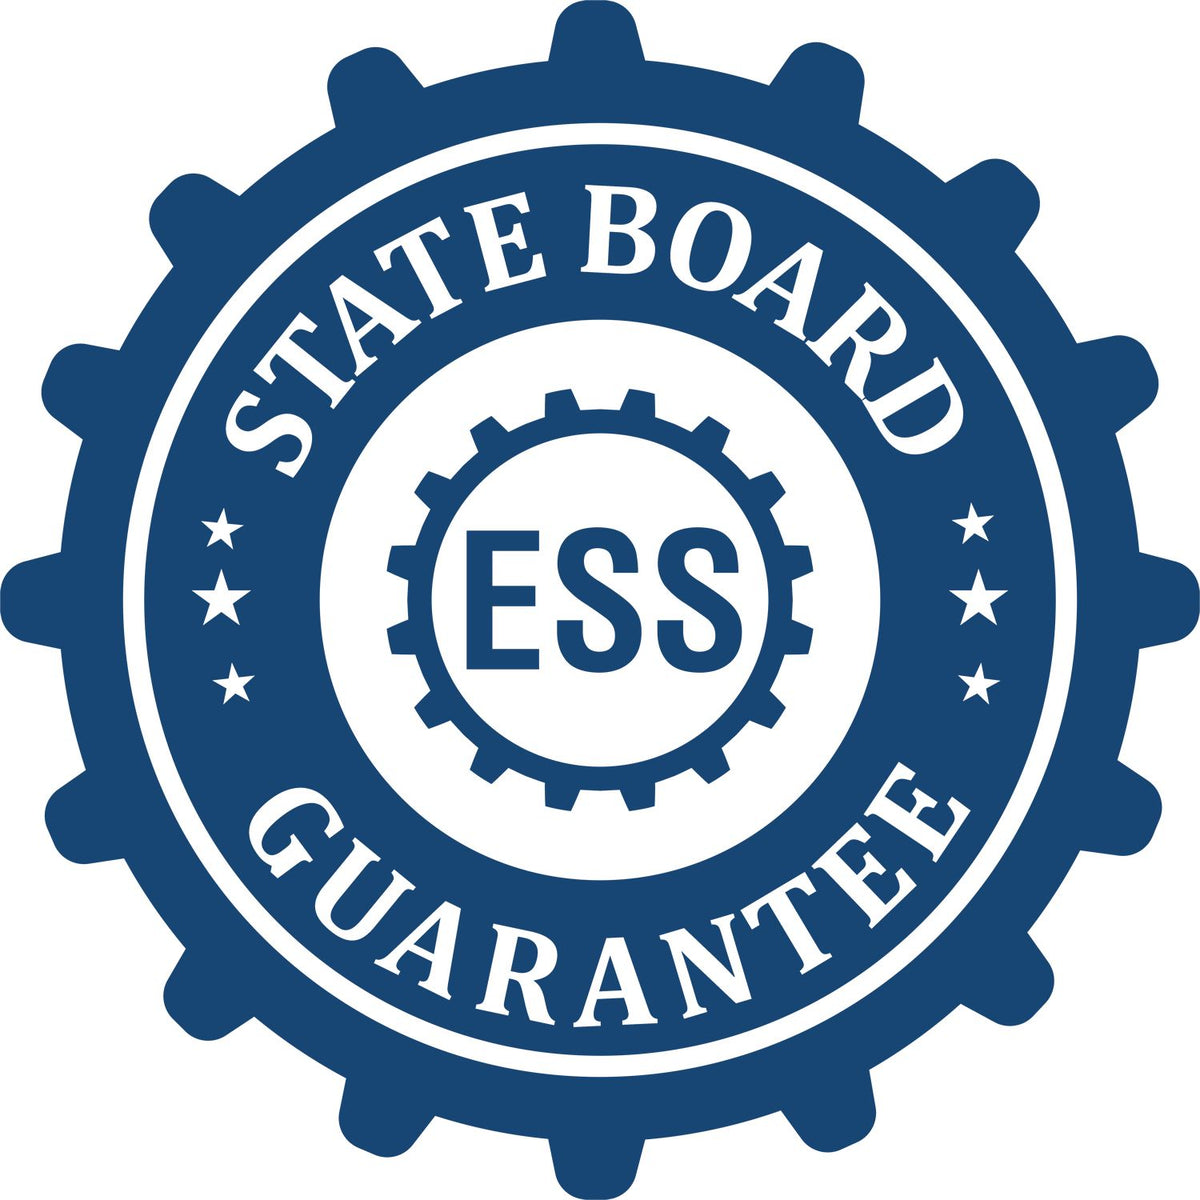 An emblem in a gear shape illustrating a state board guarantee for the Gift Florida Land Surveyor Seal